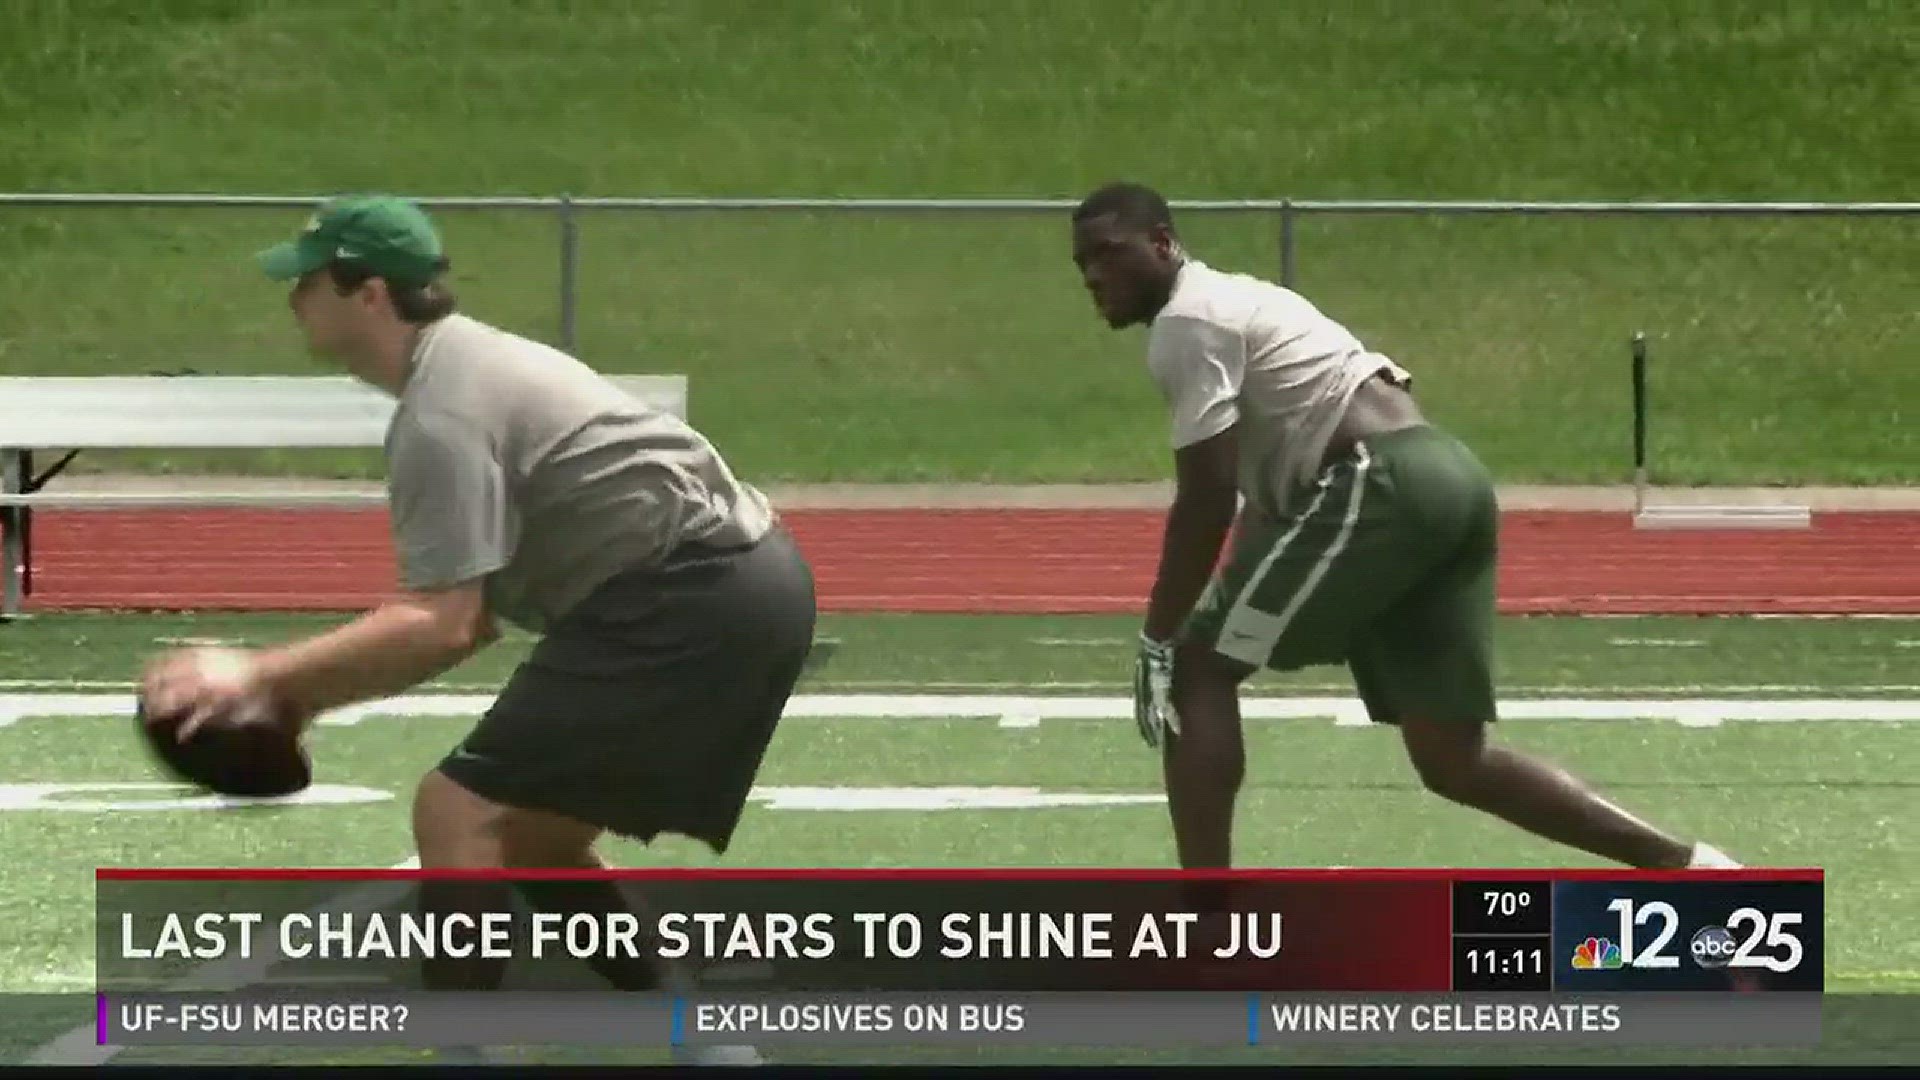 Last chance for stars to shine at JU